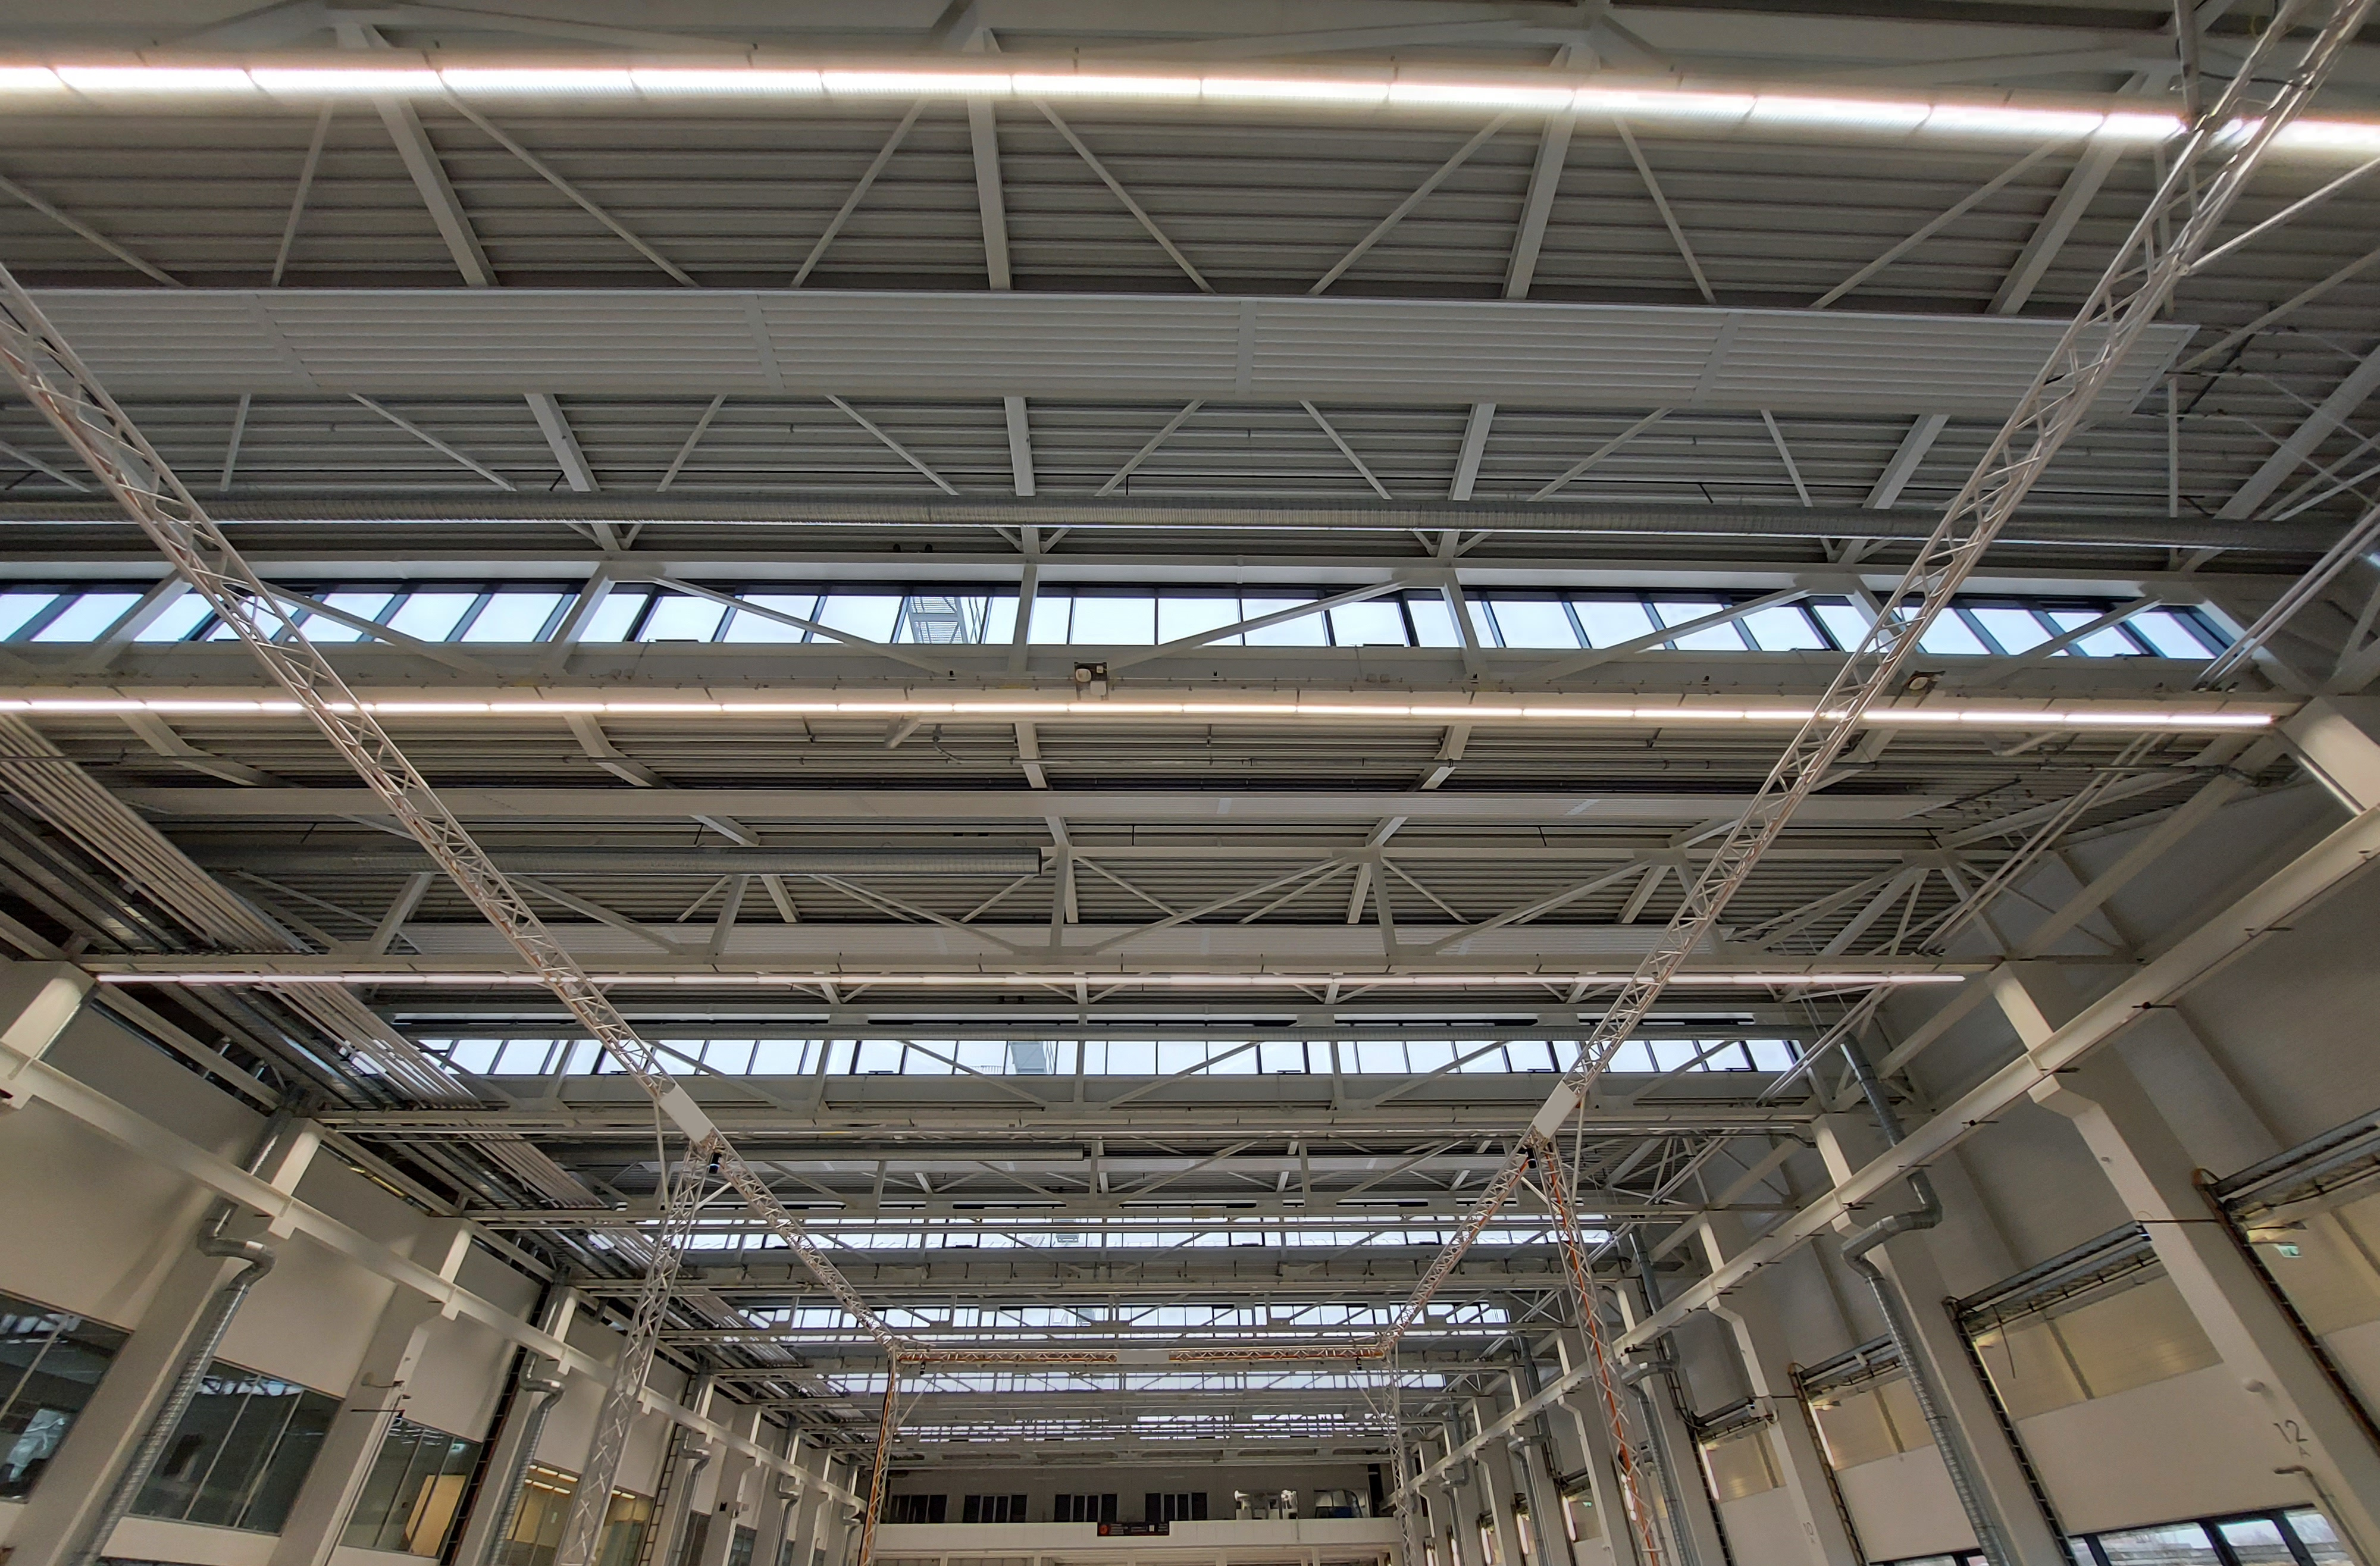 Ceiling structure of the factory hall